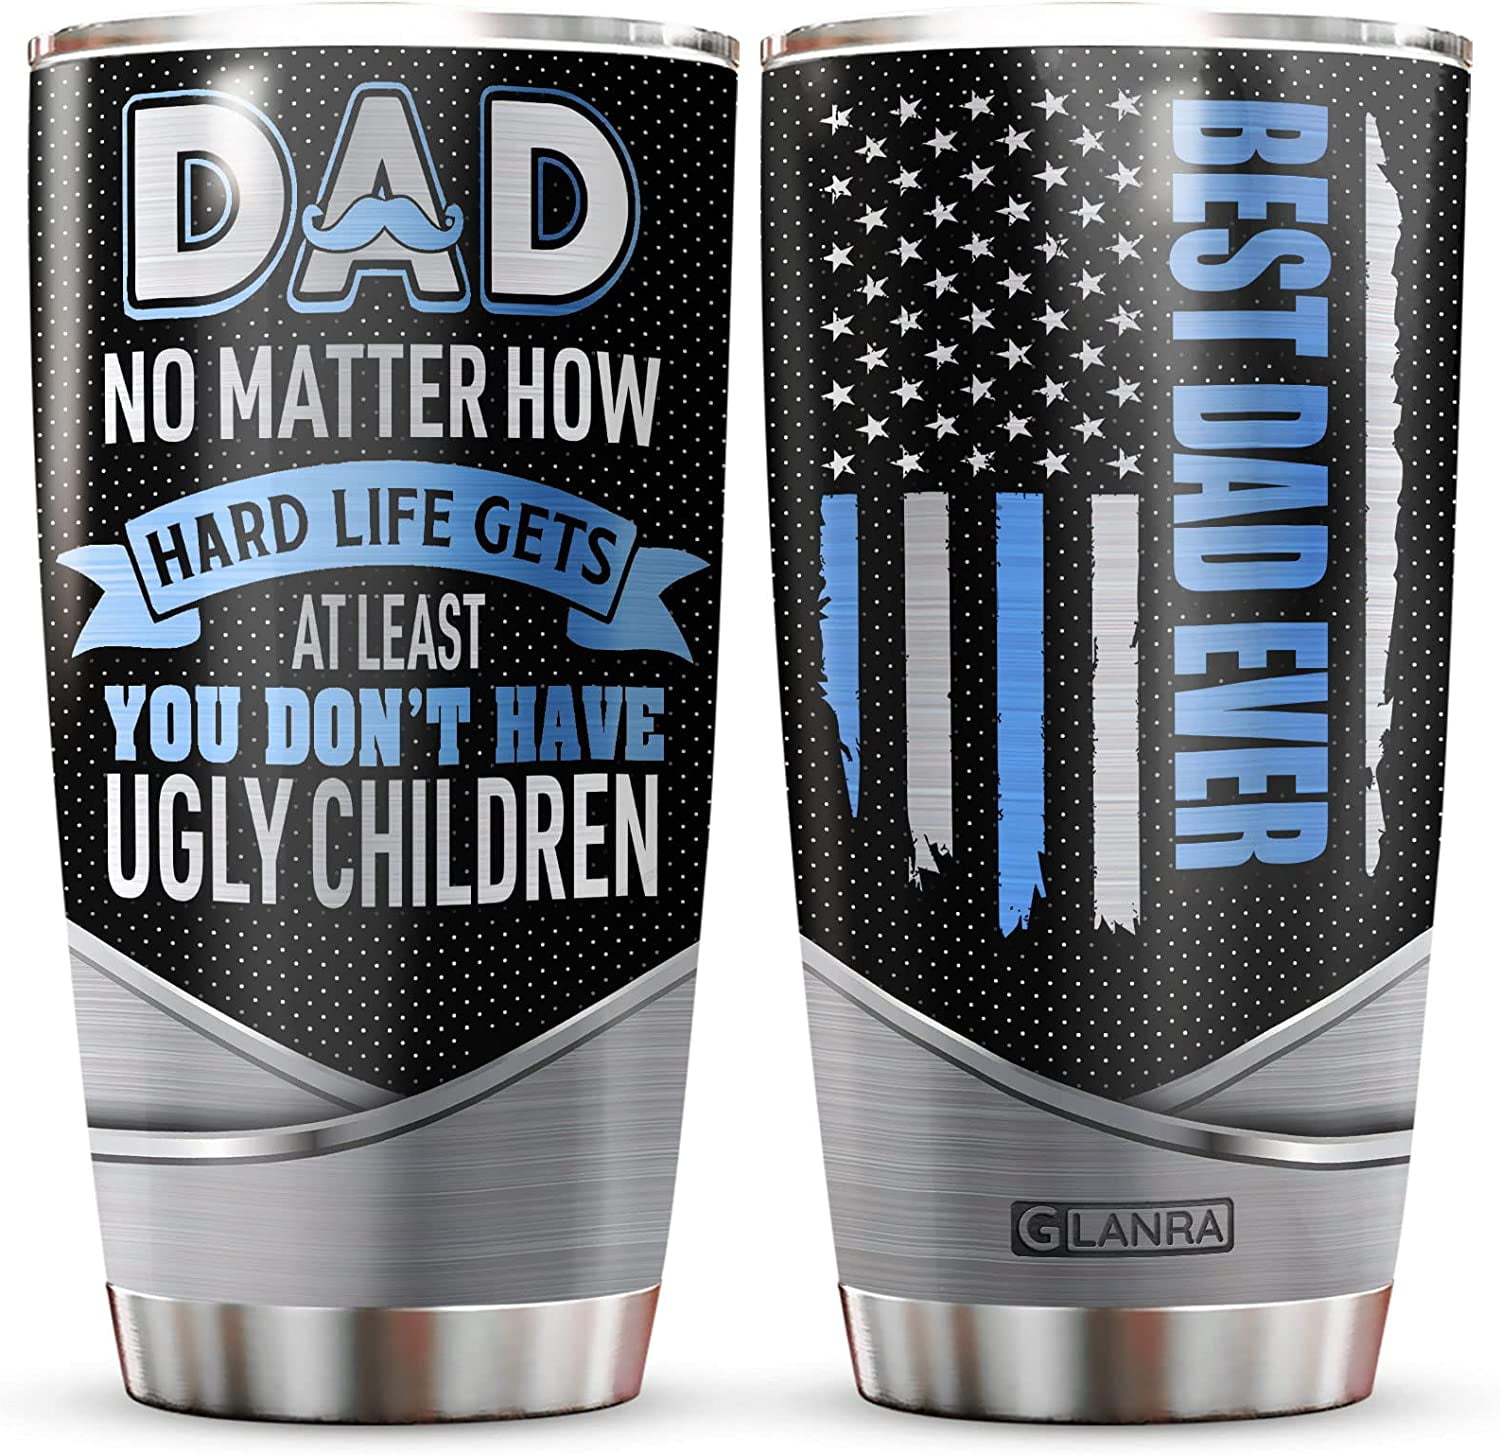 (Up to 4 Kids) Papa Bear The Most Powerful And Relentless Man Personalized  Father's Day Gift For Dad Stepdad From Daughter Bonus Dad Tumbler 20oz Insulated  Cup